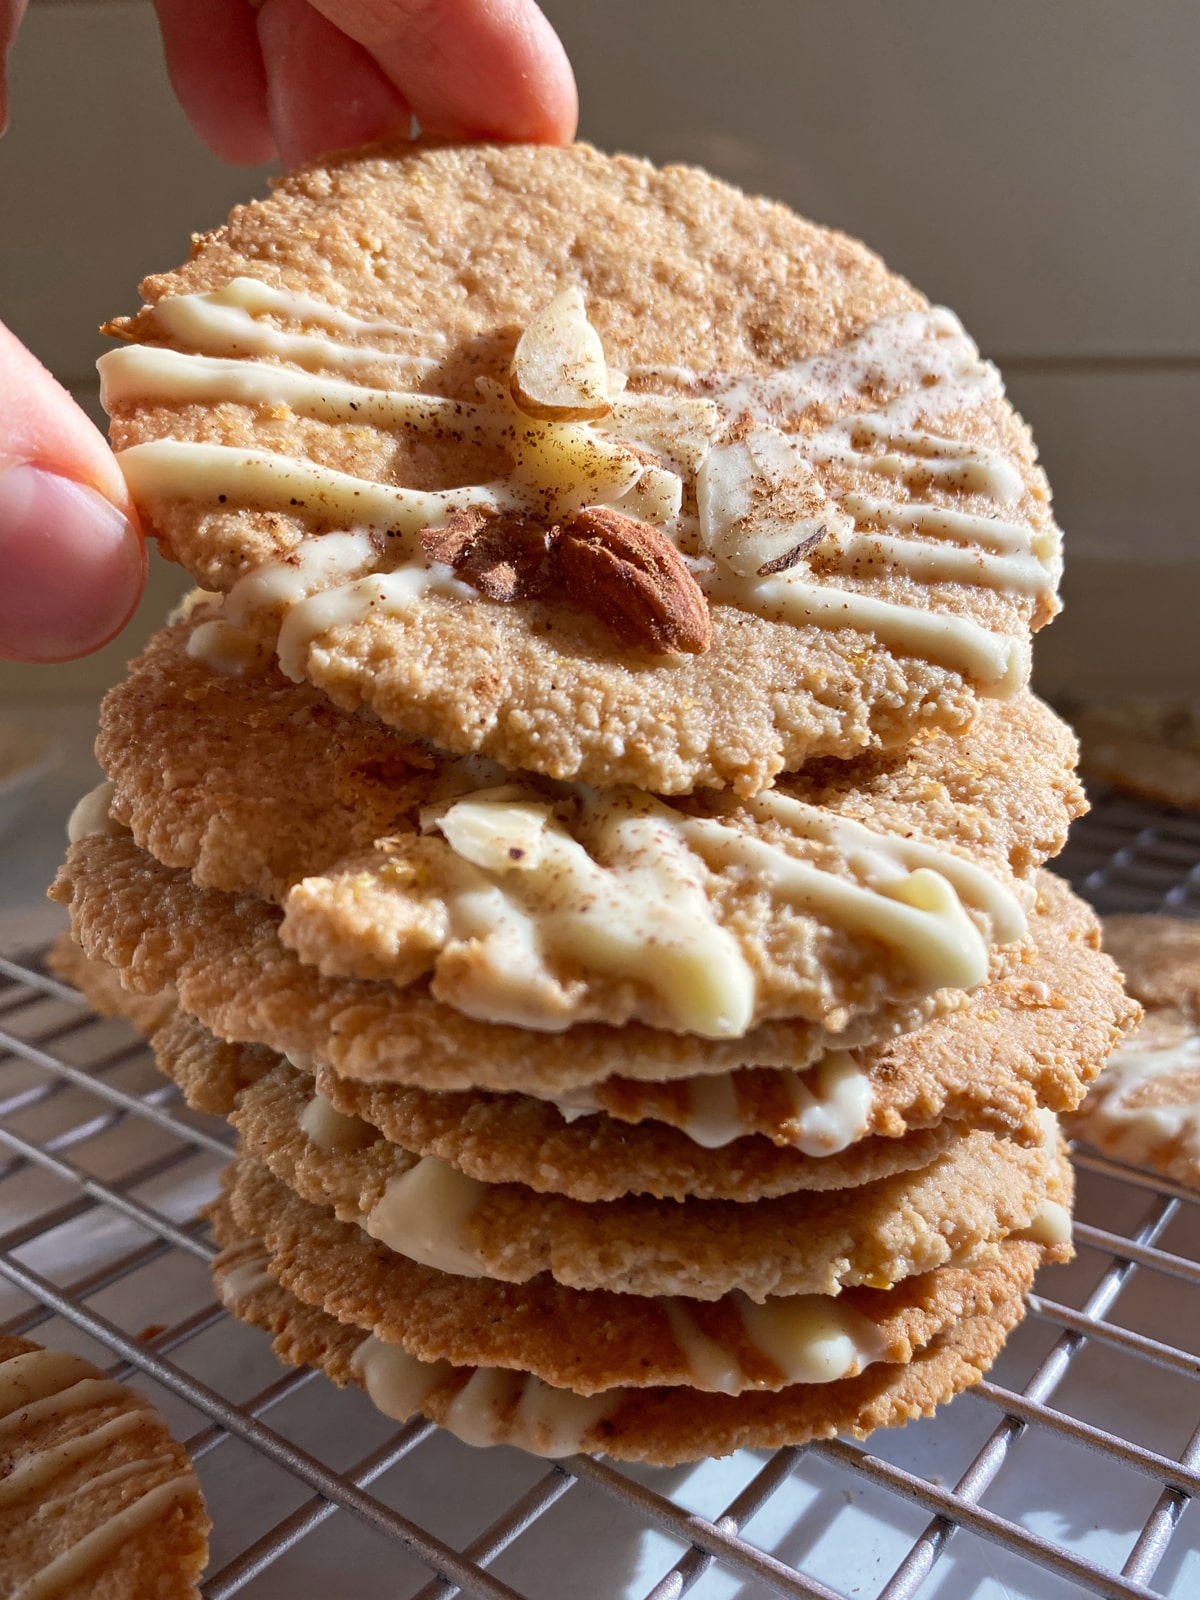 Grabbing the top cookie from a stack of lemon ginger cookies.